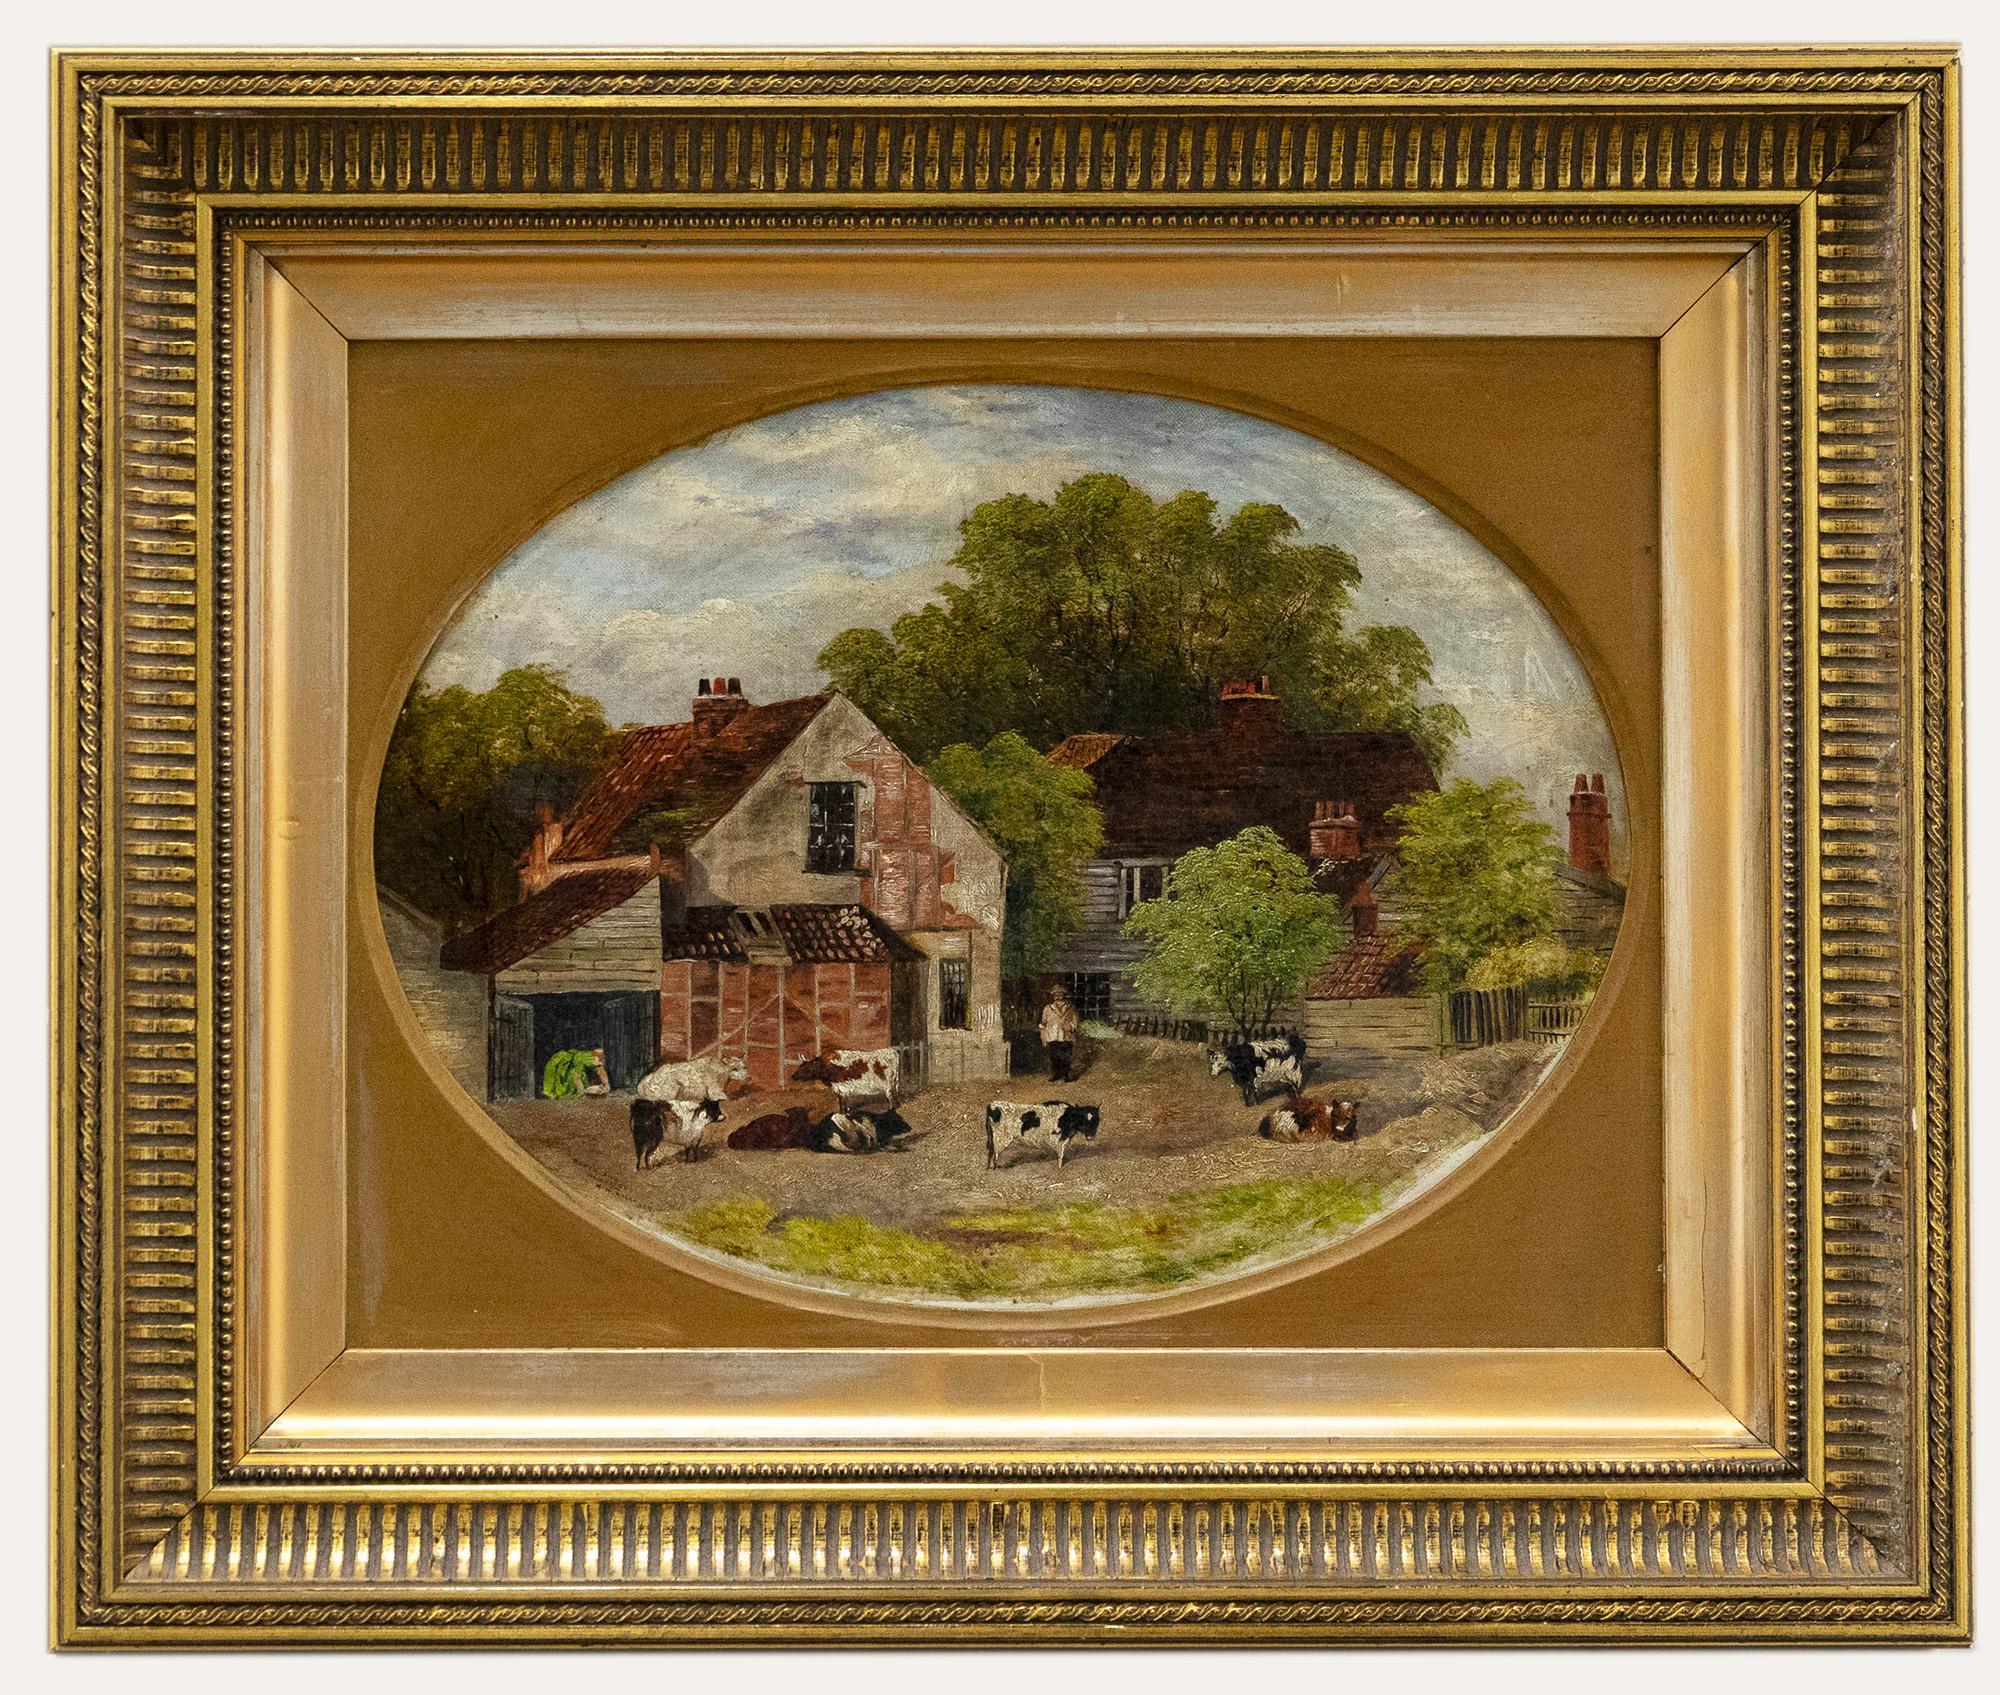 Unknown Landscape Painting - A. Finlayson - Framed Mid 19th Century Oil, North End, Hampstead